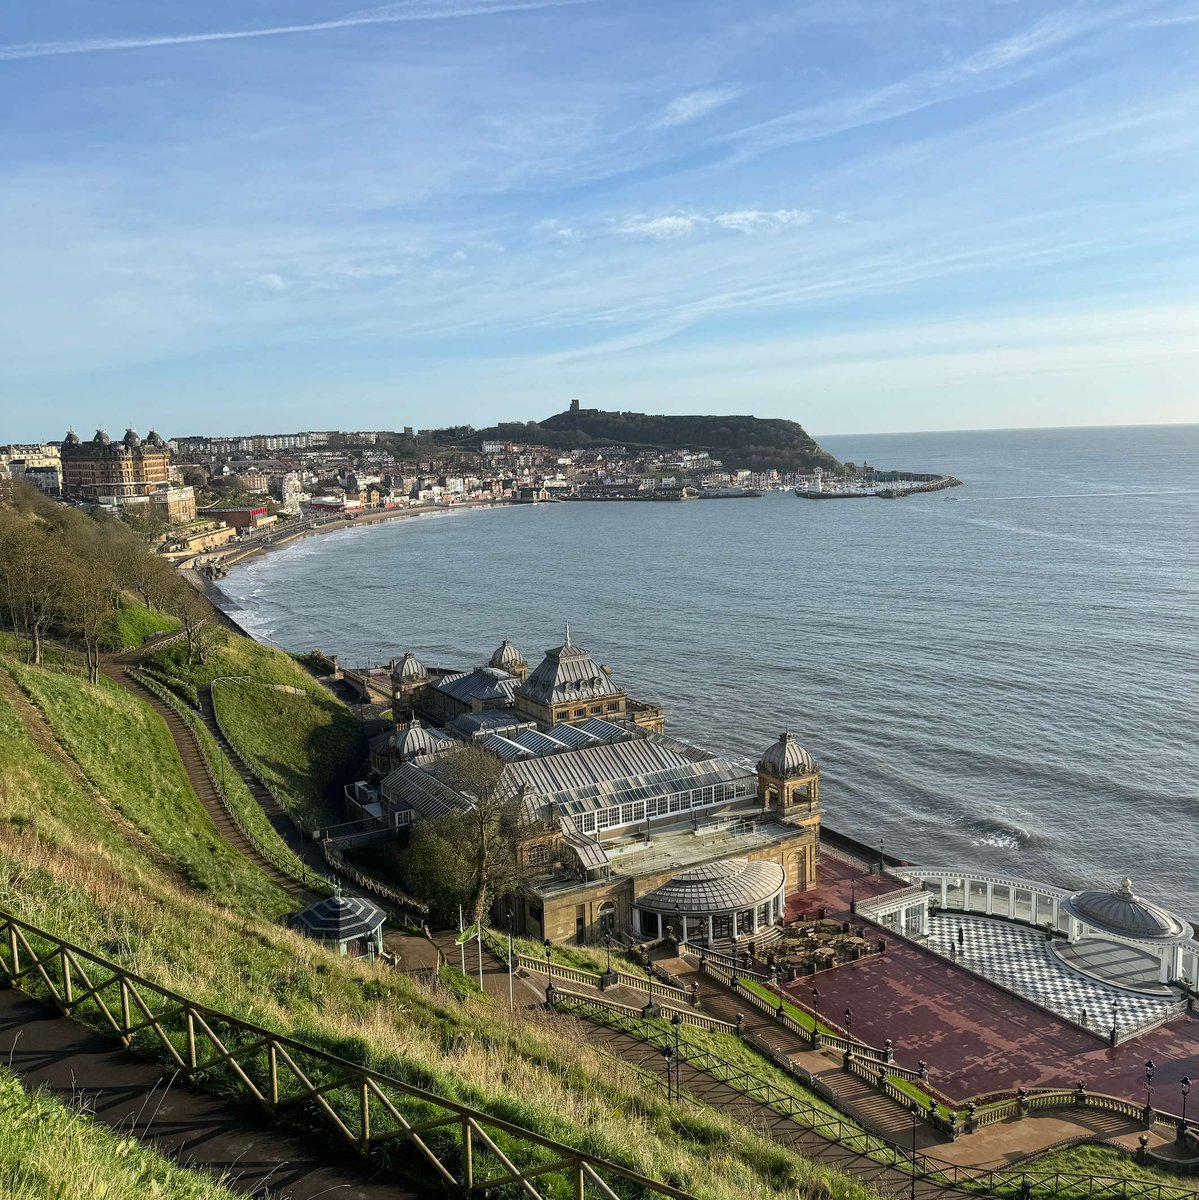 Scarborough has been named by The Express newspaper as The Most Beautiful seaside town in England. Not that we didn't know it was special before. In the middle of Route YC it's definitely worth a visit. Check out what the article says below. ow.ly/jFuL50Rl56A